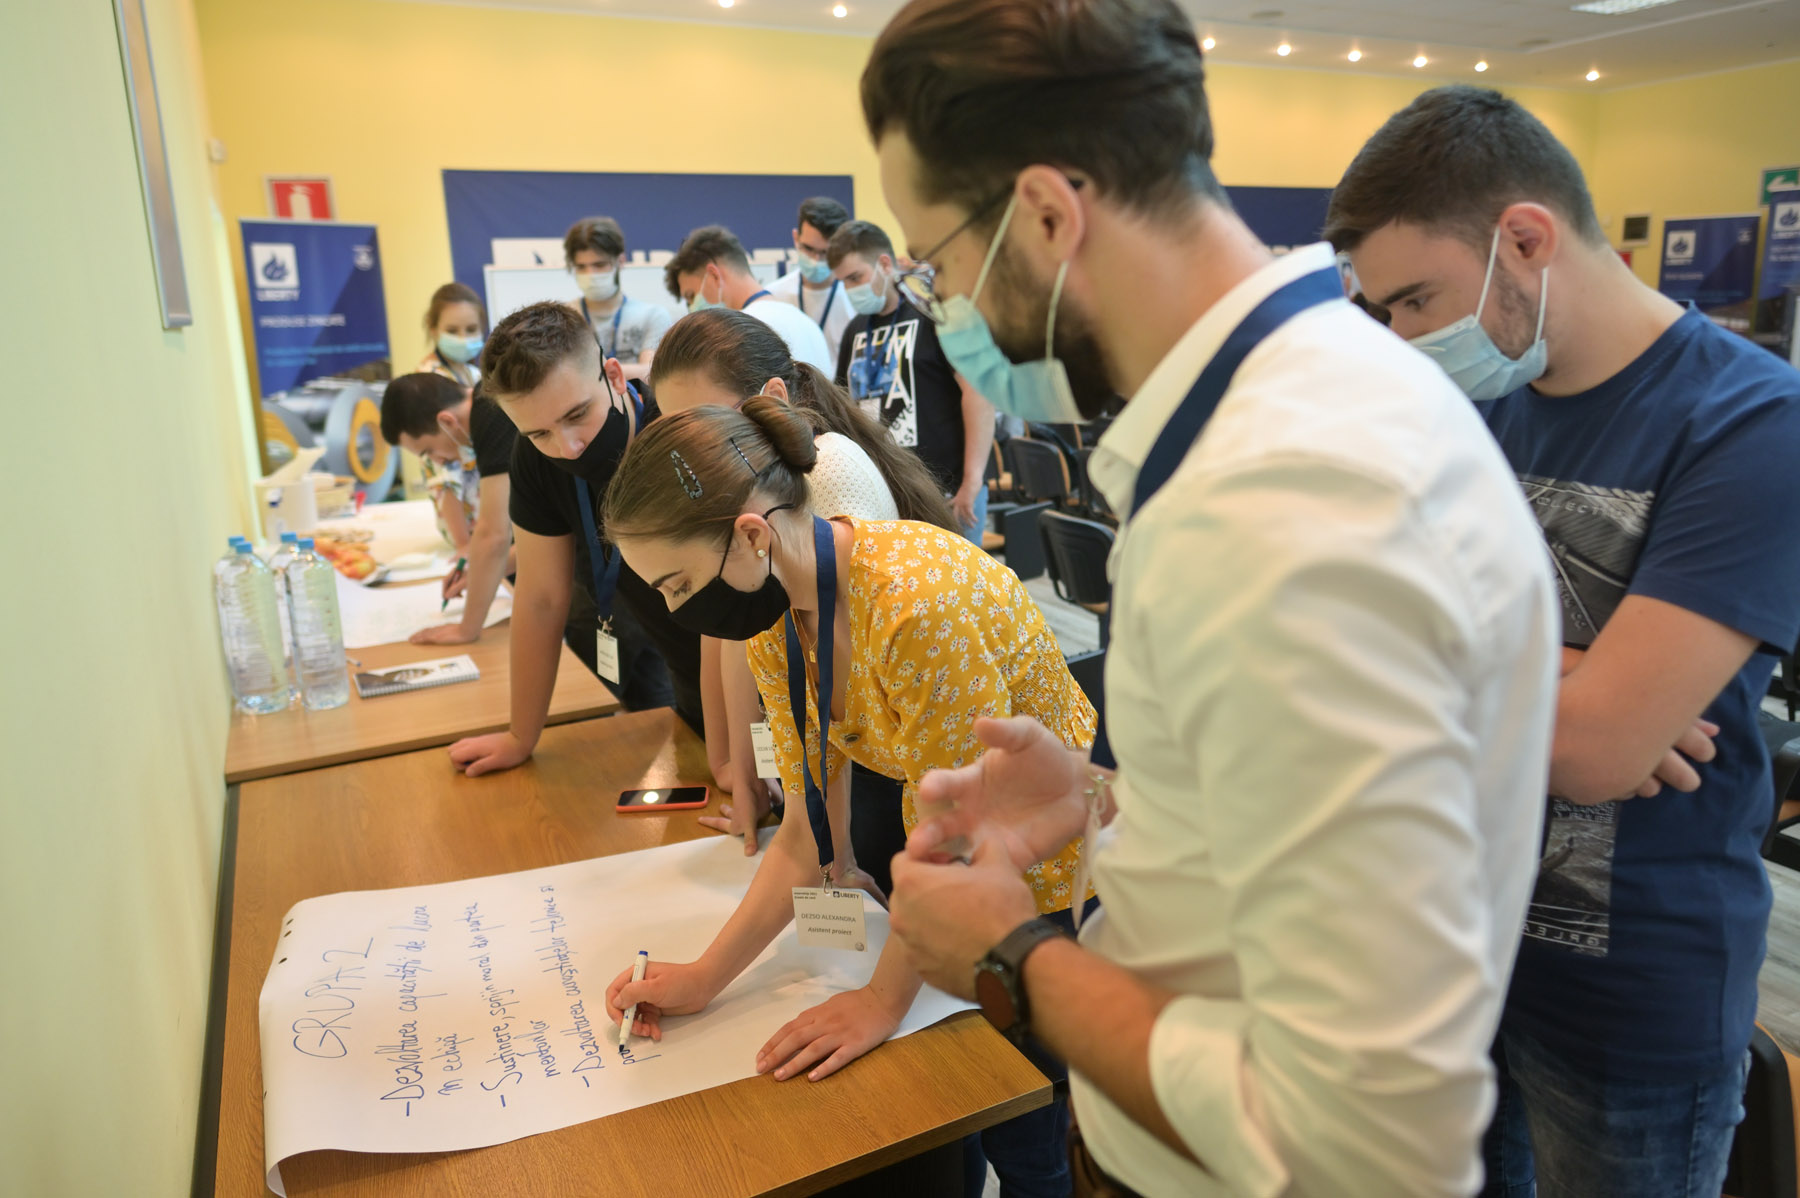 LIBERTY Galati opens the 10th edition of its Summer School